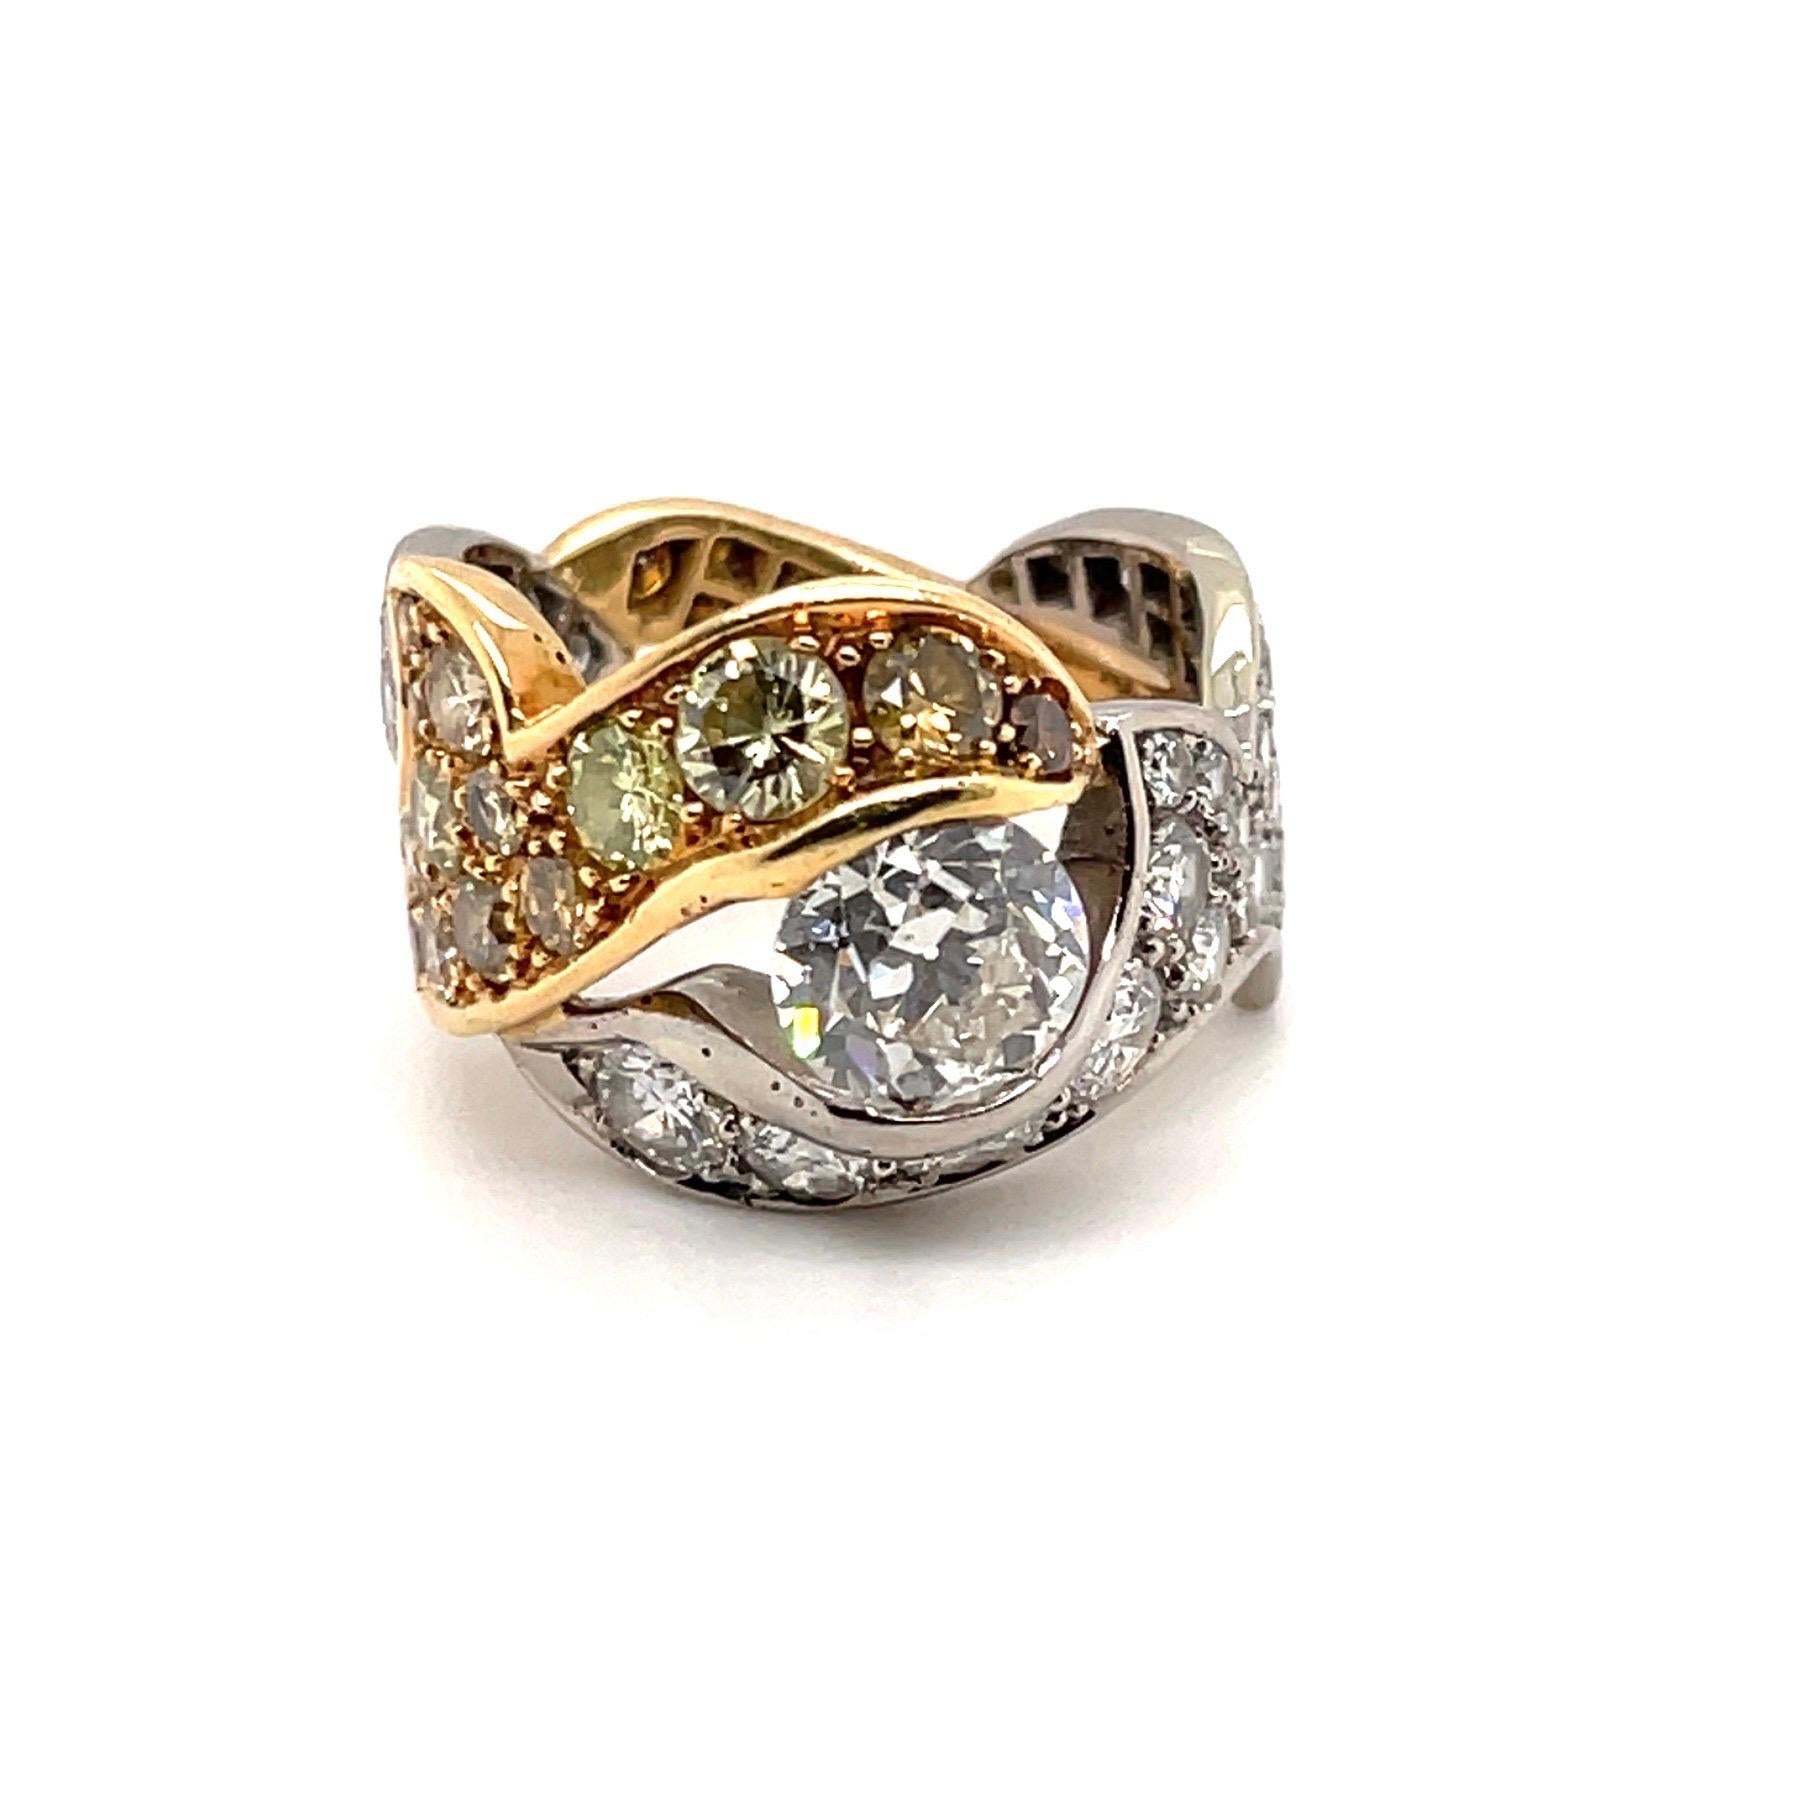 Elegant 18 karat yellow and white gold solitaire diamond band ring.

Eye-catching ring, designed as a series of intertwined, bicolor floral band motifs, pavé-set with white, respectively champagne- and cognac-colored brilliant-cut diamonds,